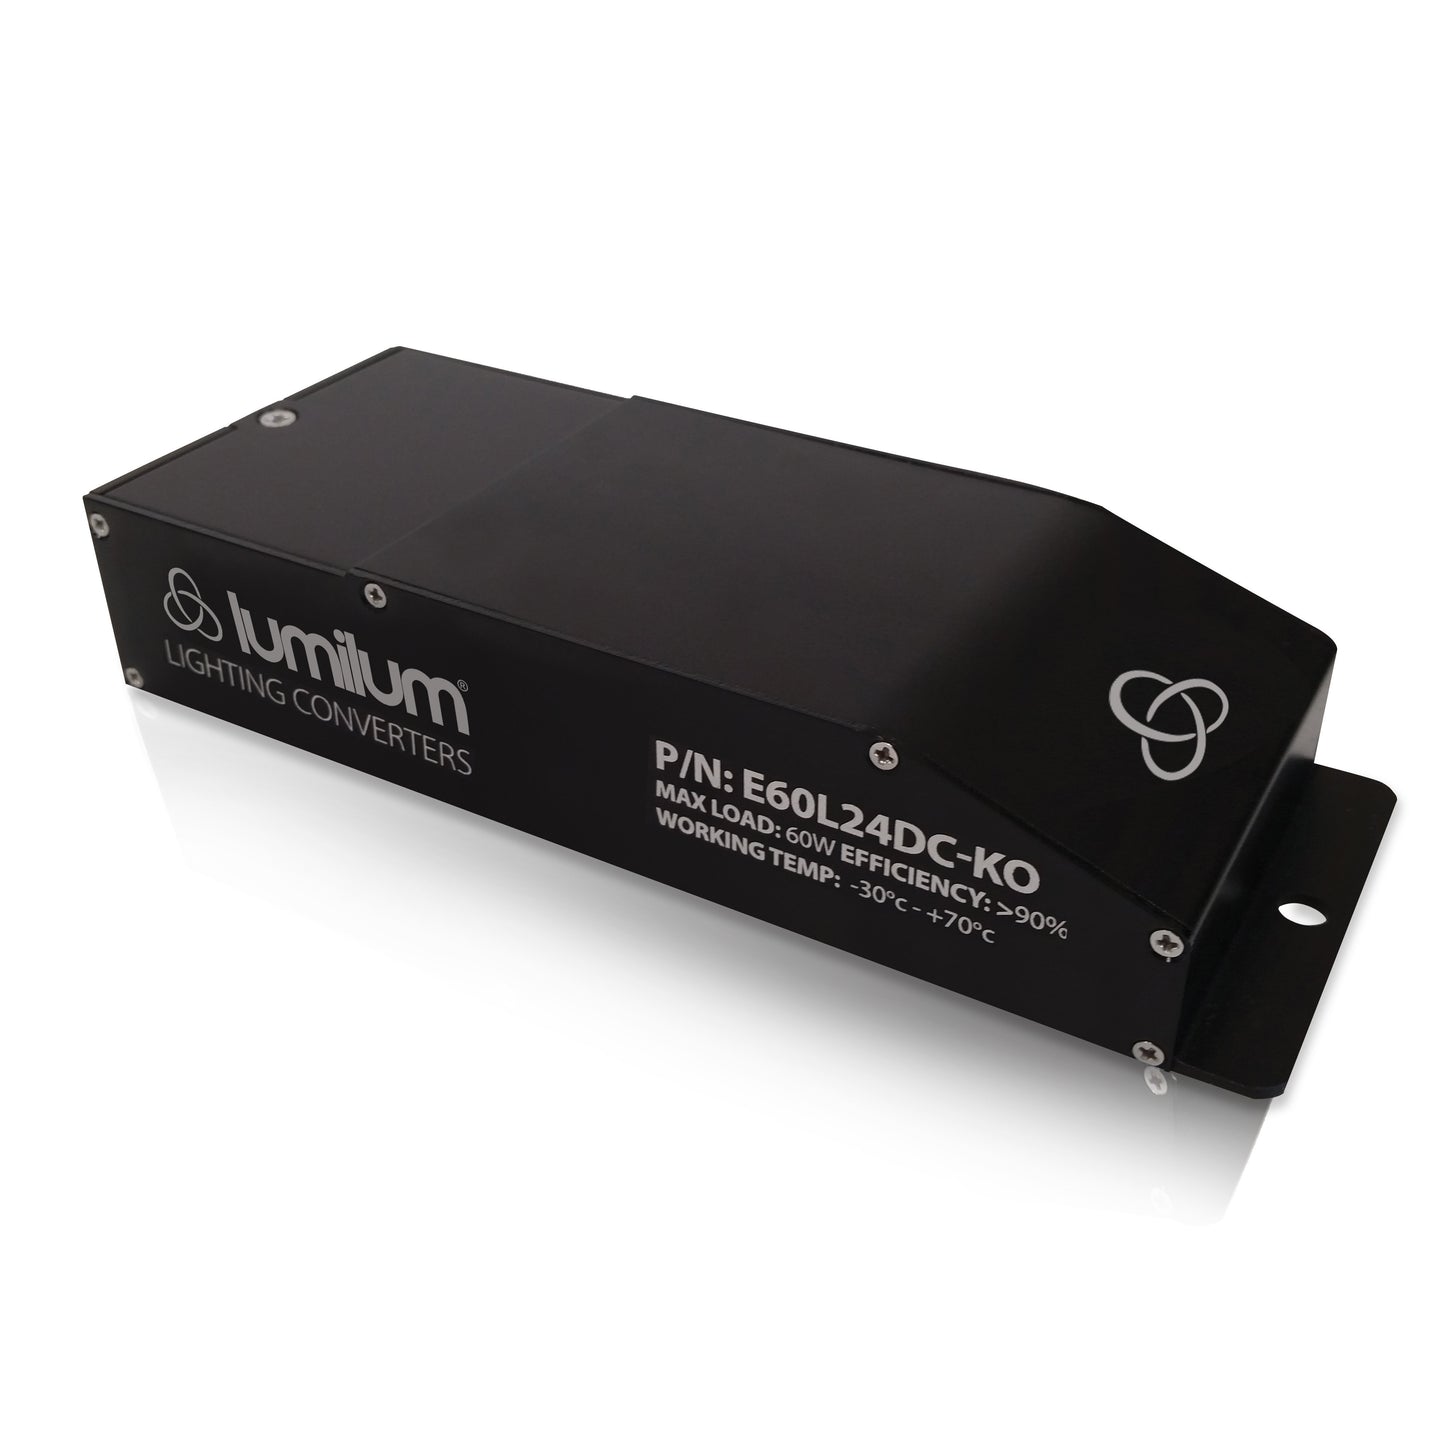 lumilum brand black 60W led transformer driver with product information marking